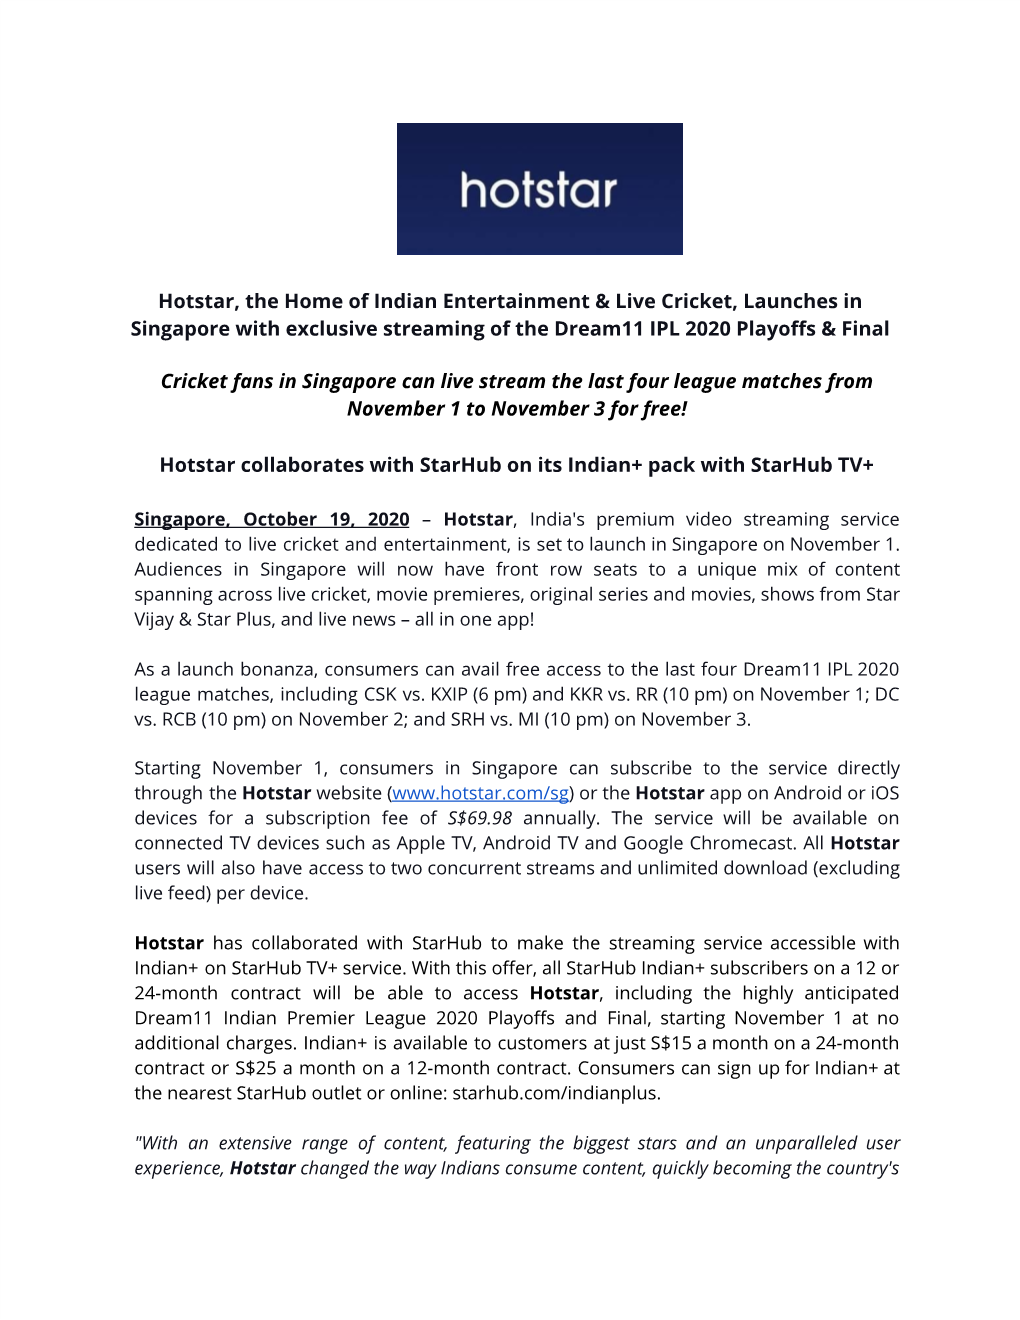 Hotstar, the Home of Indian Entertainment & Live Cricket